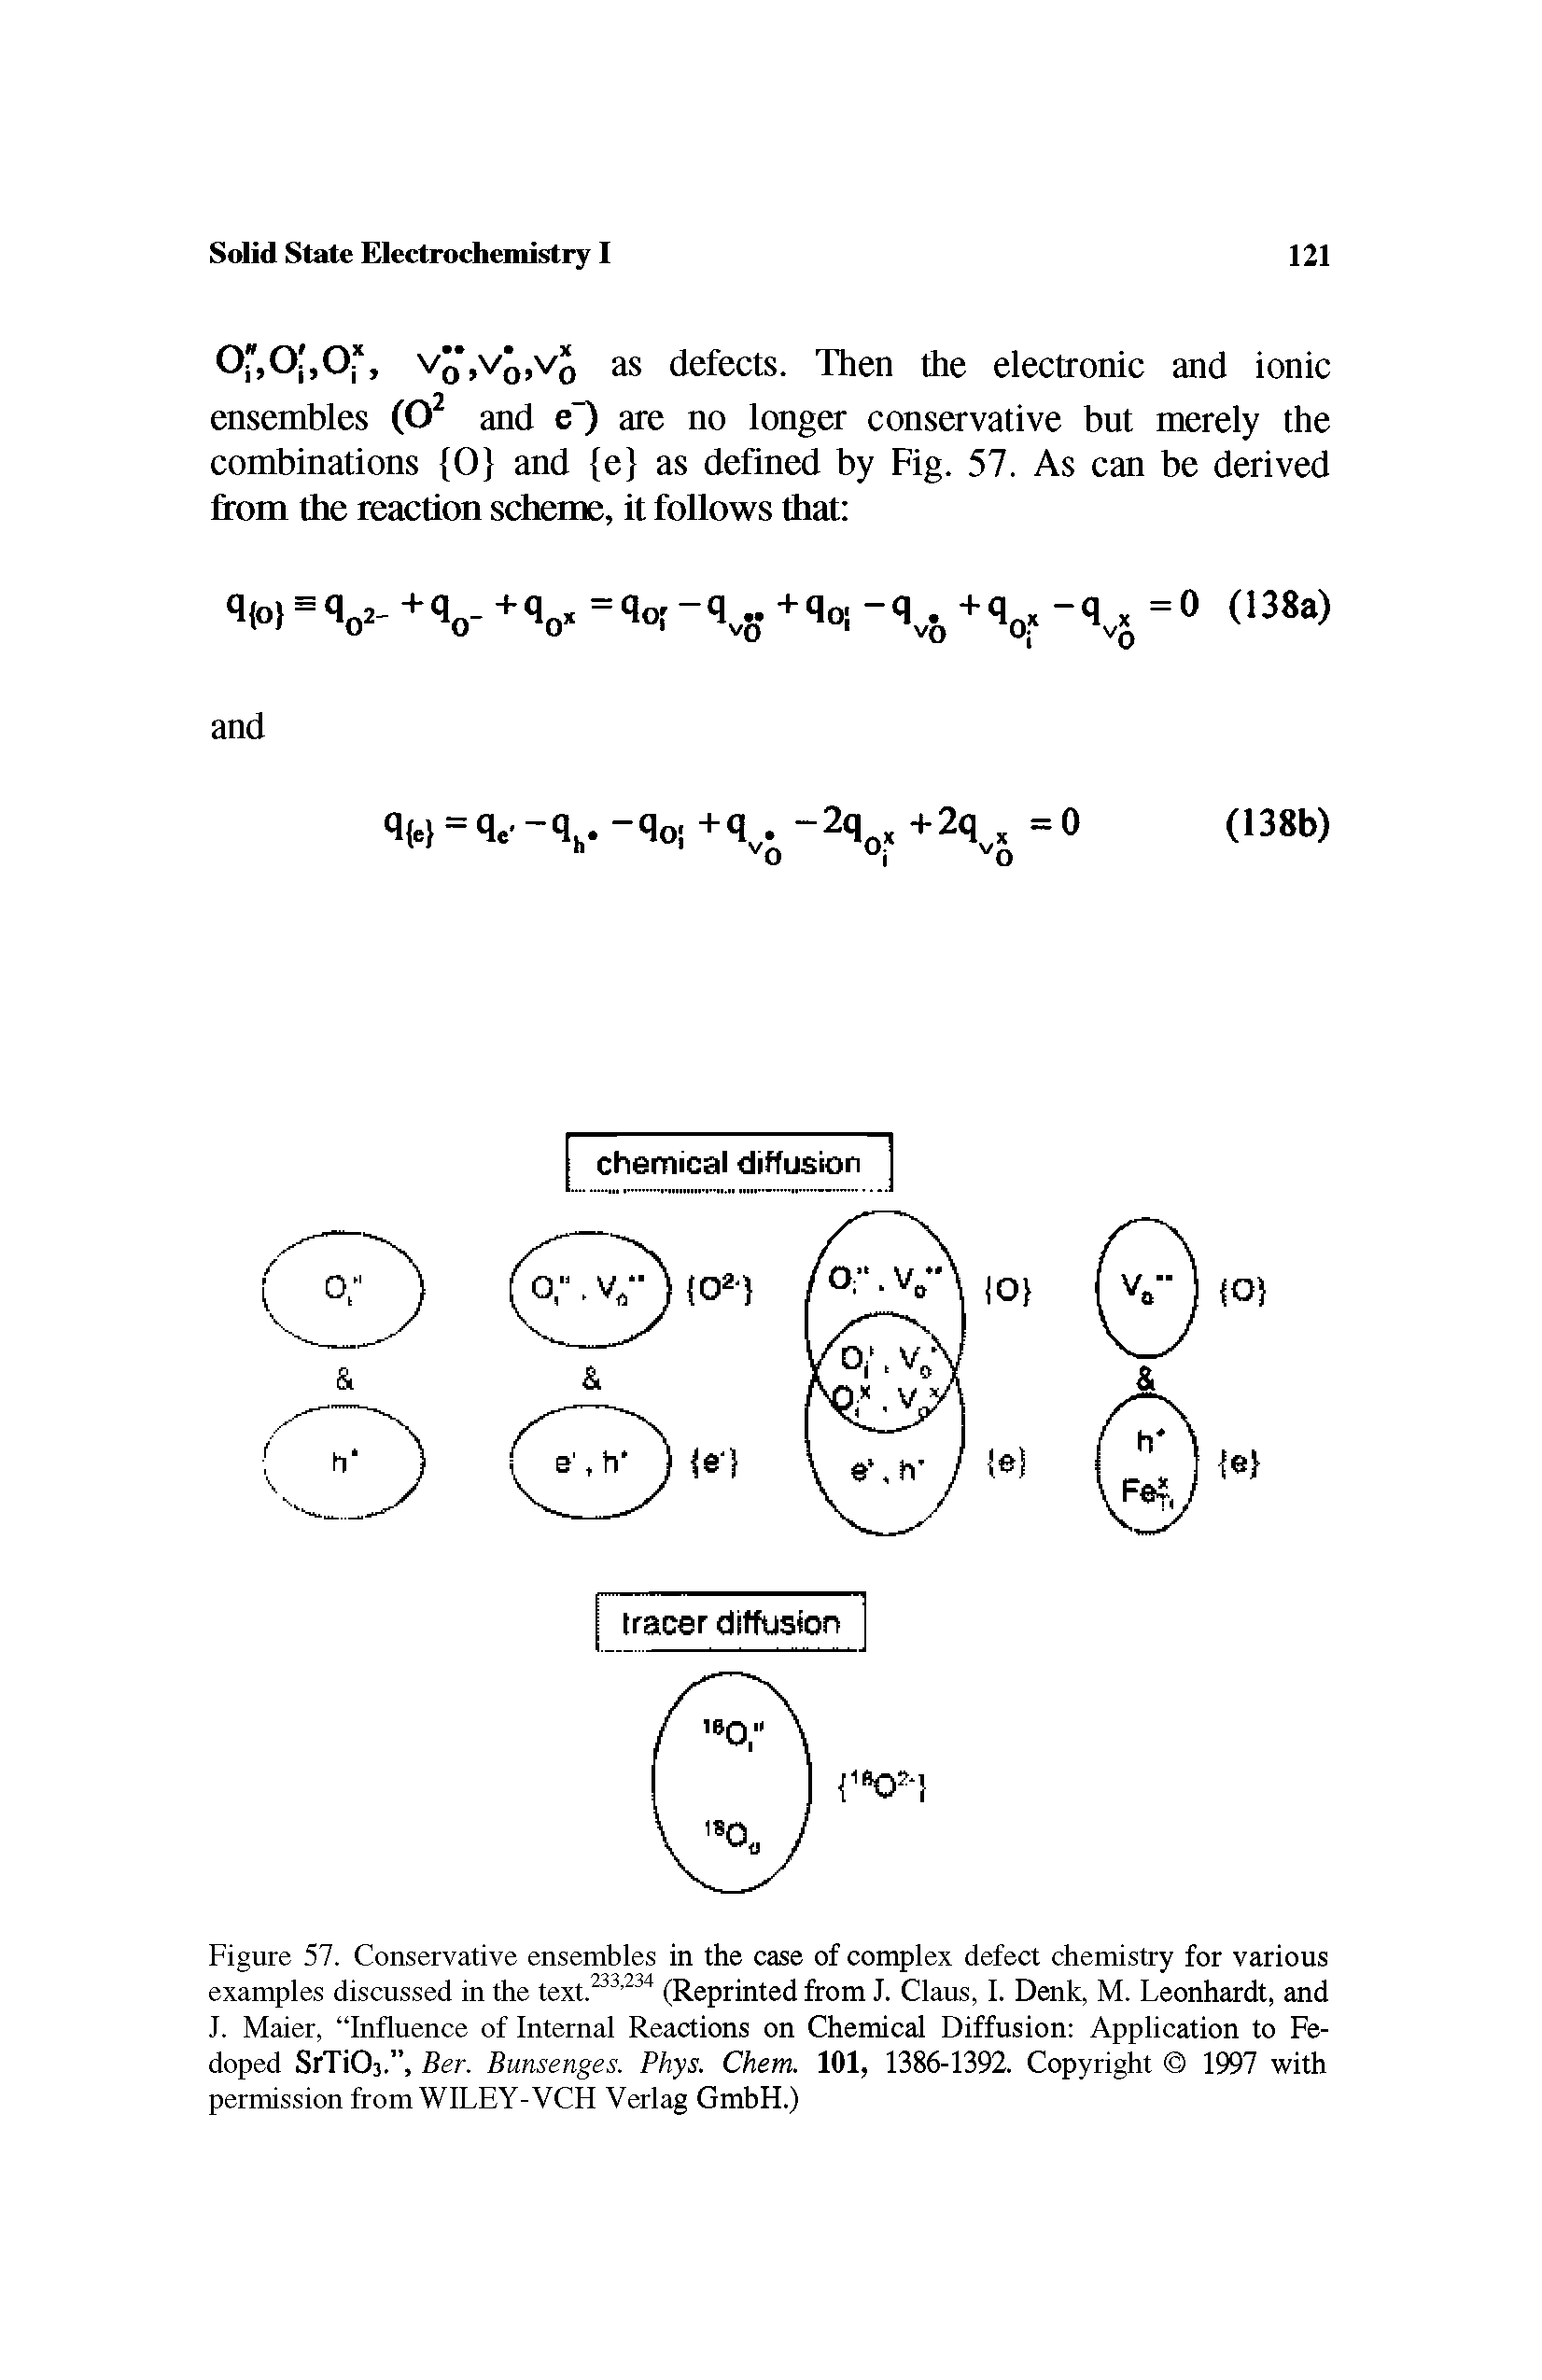 Figure 57. Conservative ensembles in the case of complex defect chemistry for various examples discussed in the text.233 234 (Reprinted from J. Claus, I. Denk, M. Leonhardt, and J. Maier, Influence of Internal Reactions on Chemical Diffusion Application to Fe-doped SrTiCV , Ber. Bunsenges. Phys. Chem. 101, 1386-1392. Copyright 1997 with permission from WILEY-VCH Verlag GmbH.)...